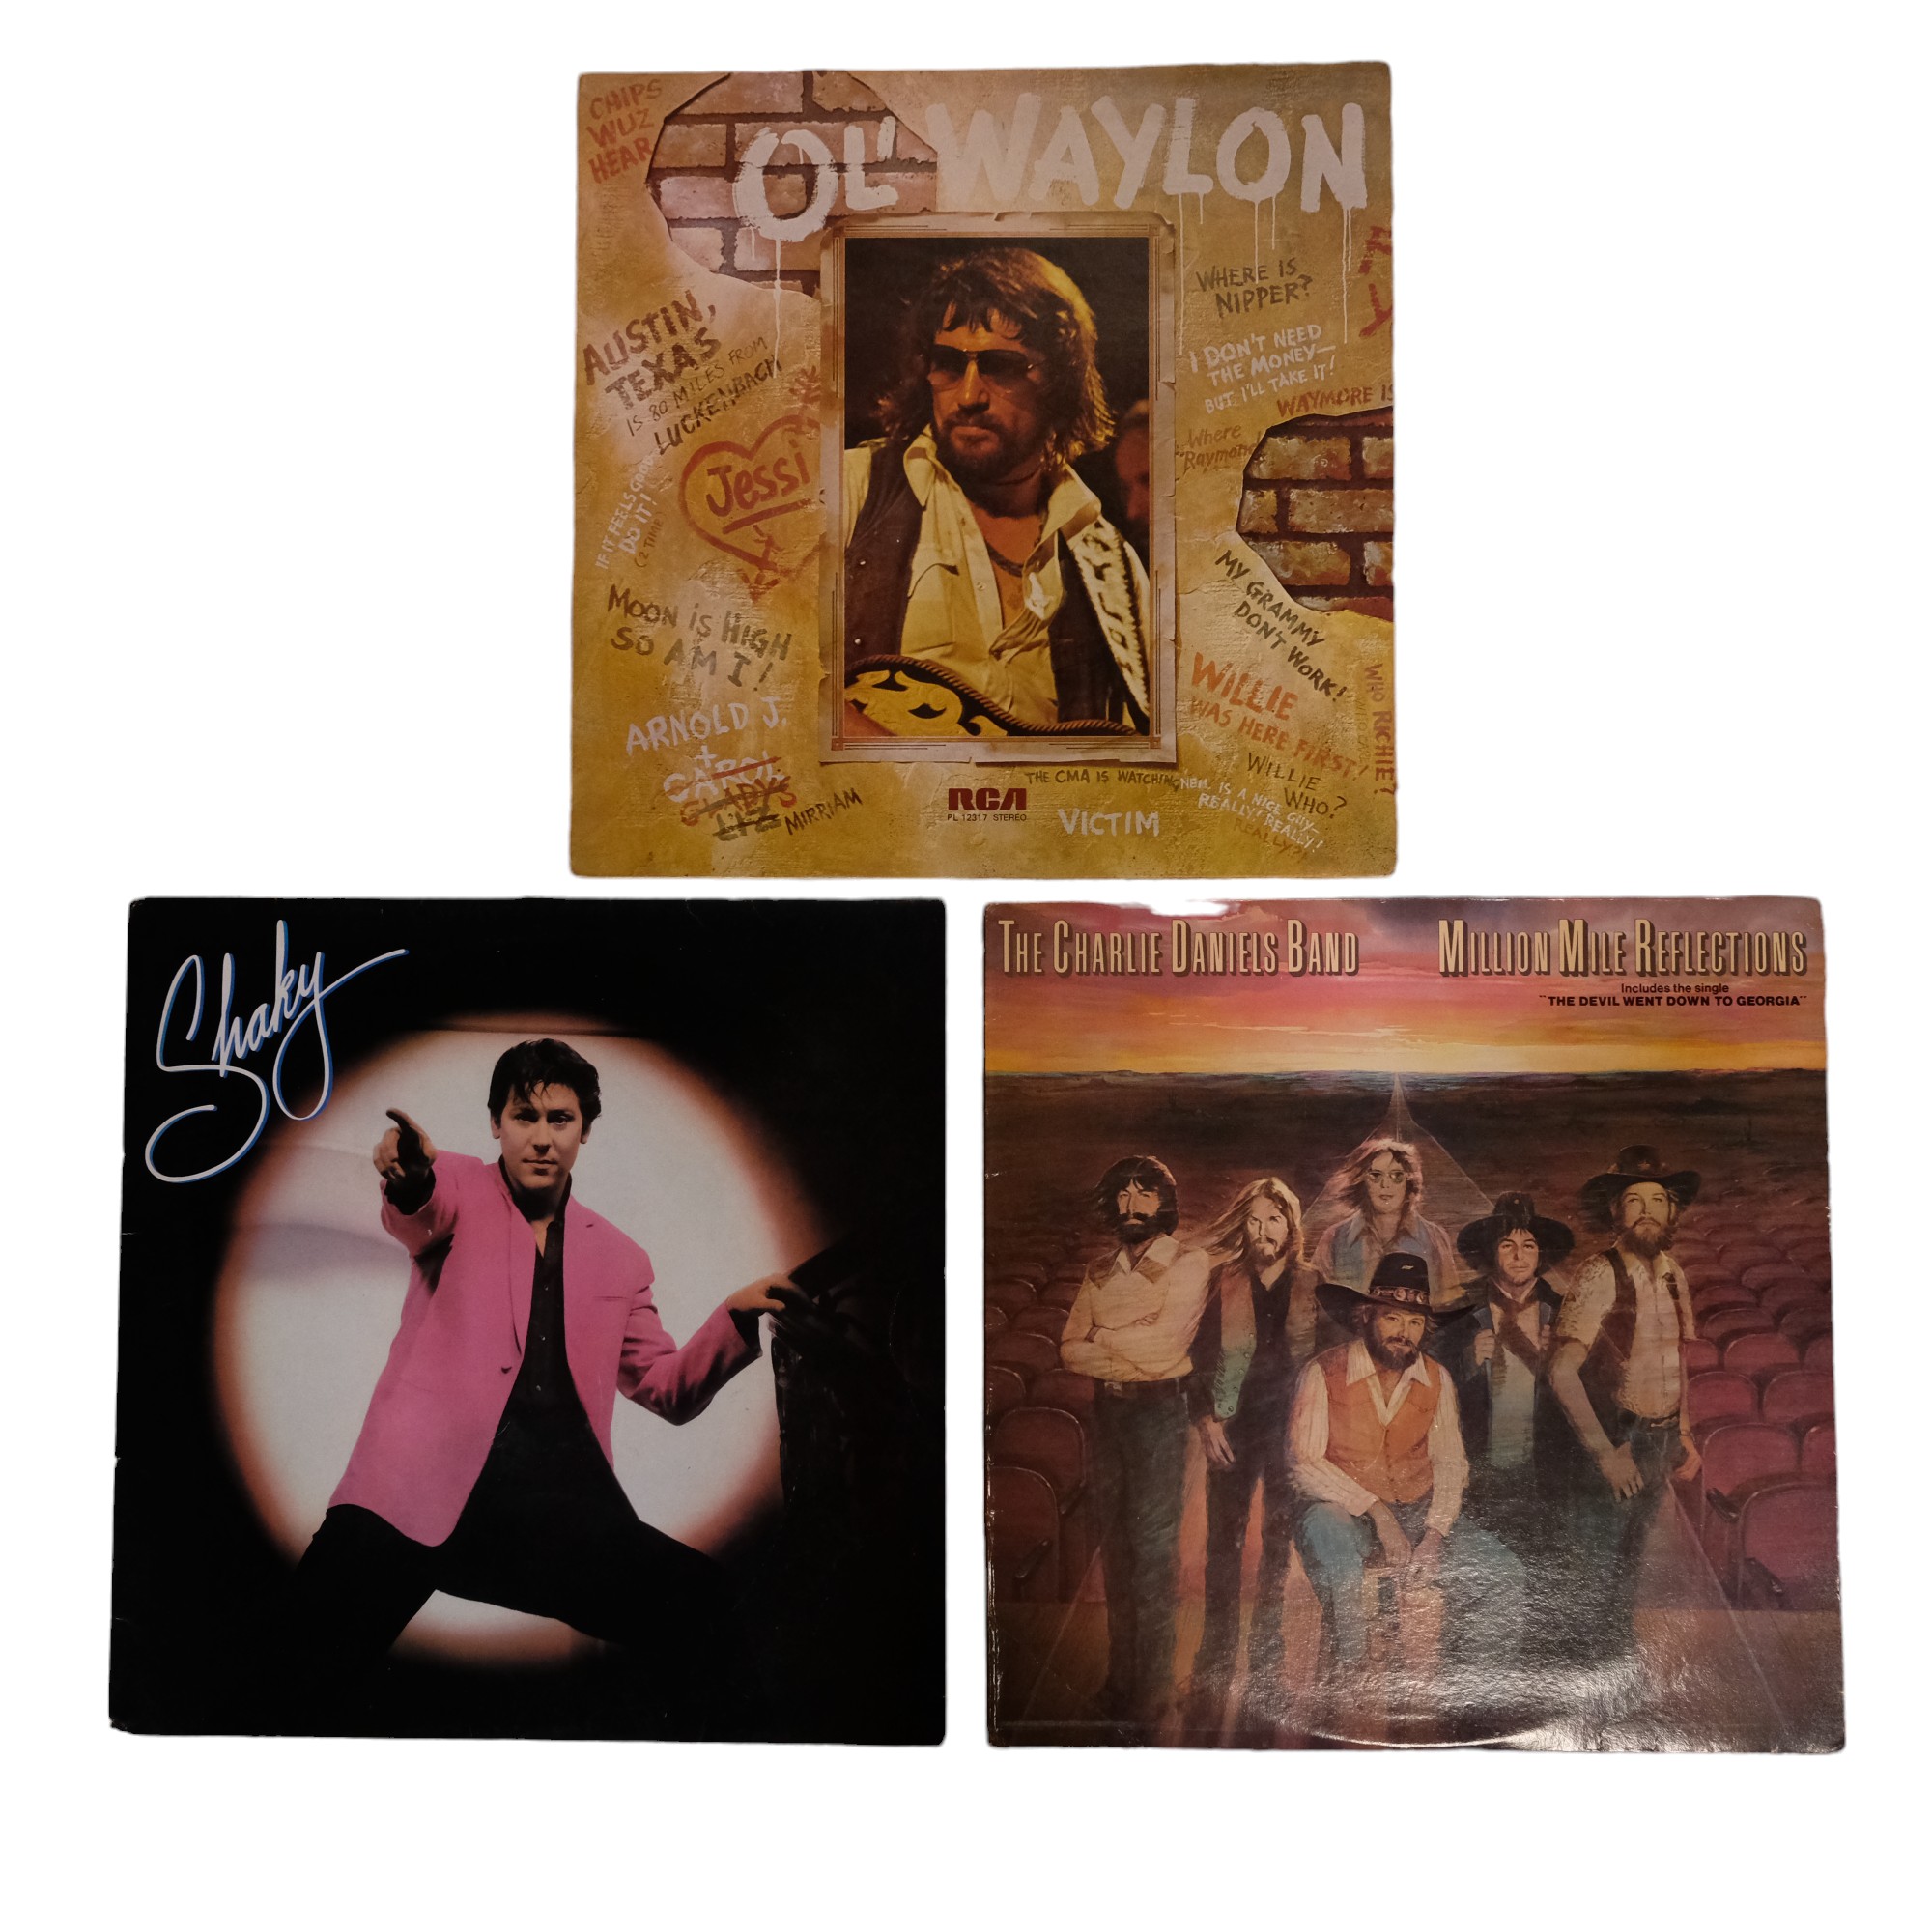 A quantity of vinyl record albums and singles including Madonna, Fleetwood Mac, Status Quo, etc - Image 3 of 6